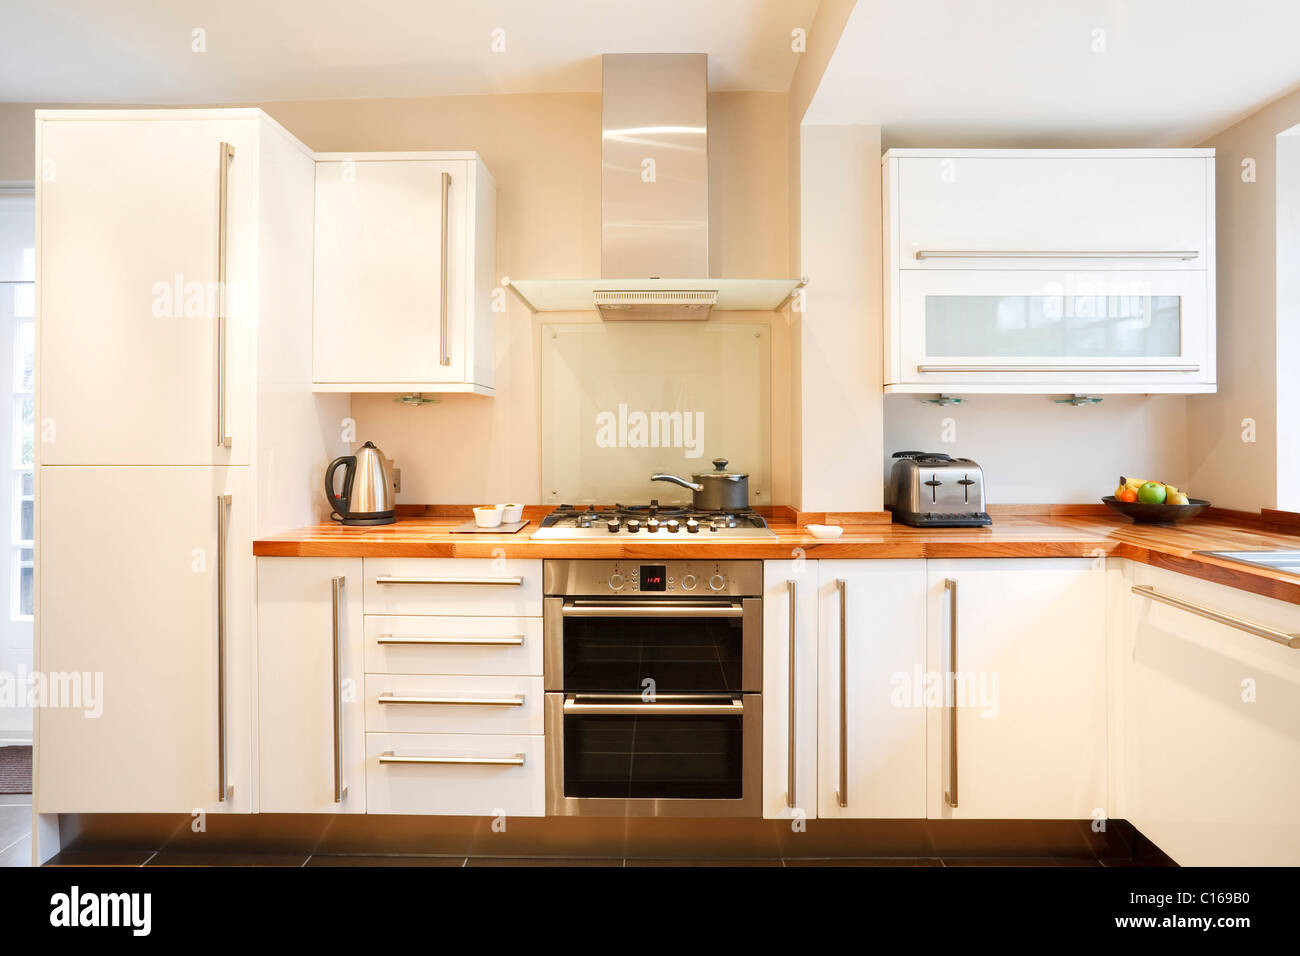 https://c8.alamy.com/comp/C169B0/modern-white-kitchen-with-wooden-worktops-and-stainless-steel-appliances-C169B0.jpg